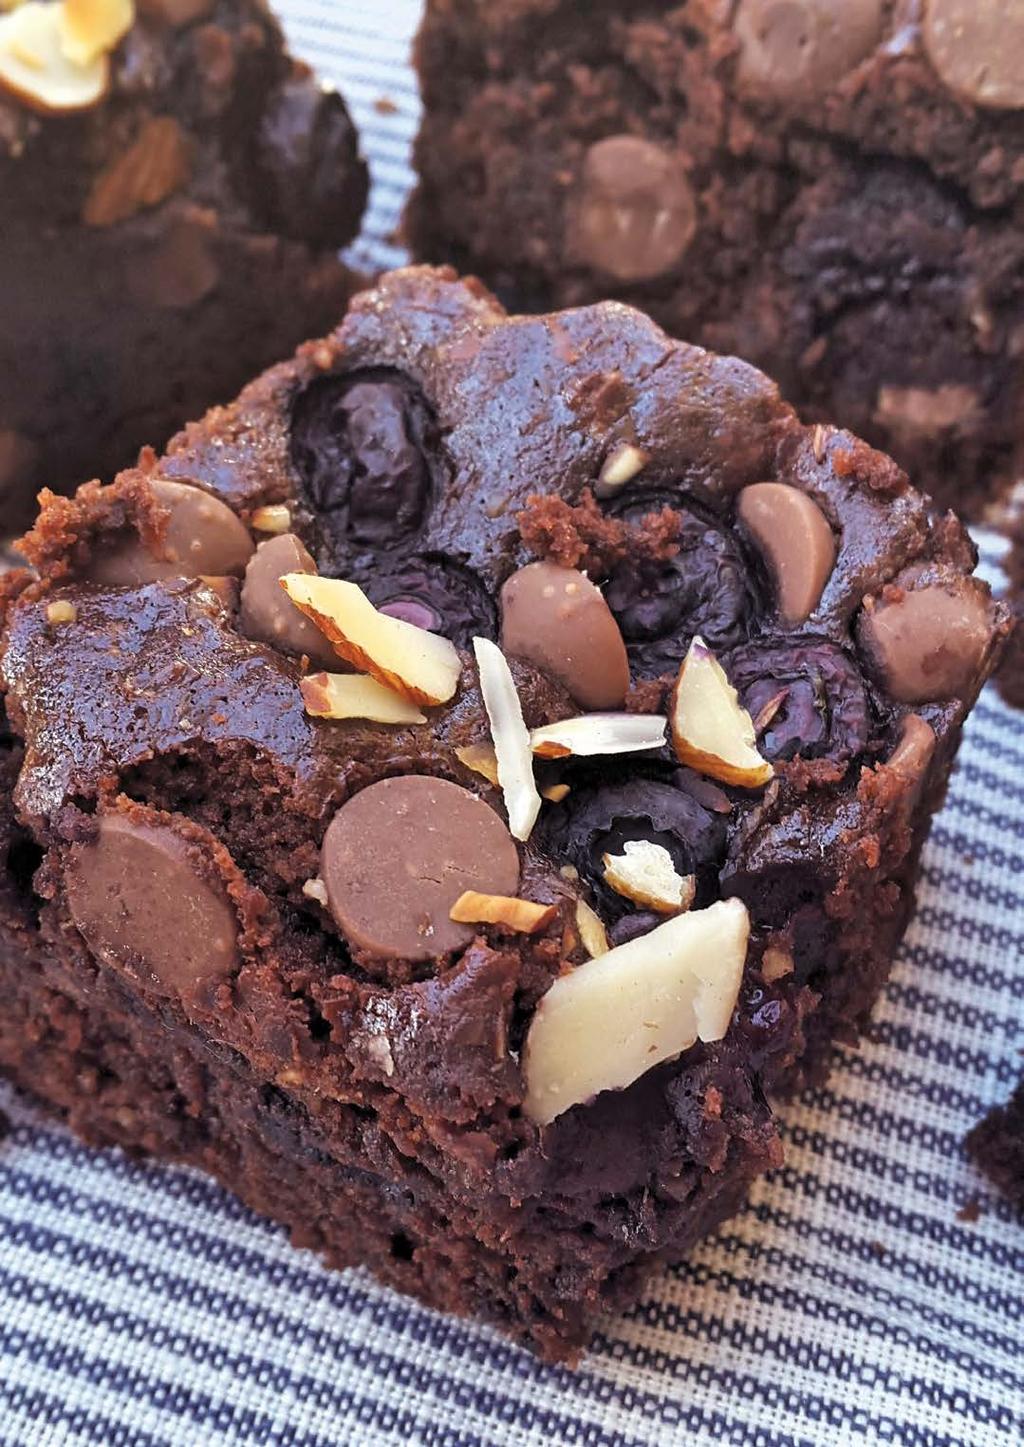 BLUEBERRY & Almond SERVES 12 ¾ cup neutral oil (sunflower, olive oil, nut oil) 200g Healtheries No Added Sugar Milk Chocolate Baking Bits (or you can use dark for a more intense brownie) + ¹/3 cup